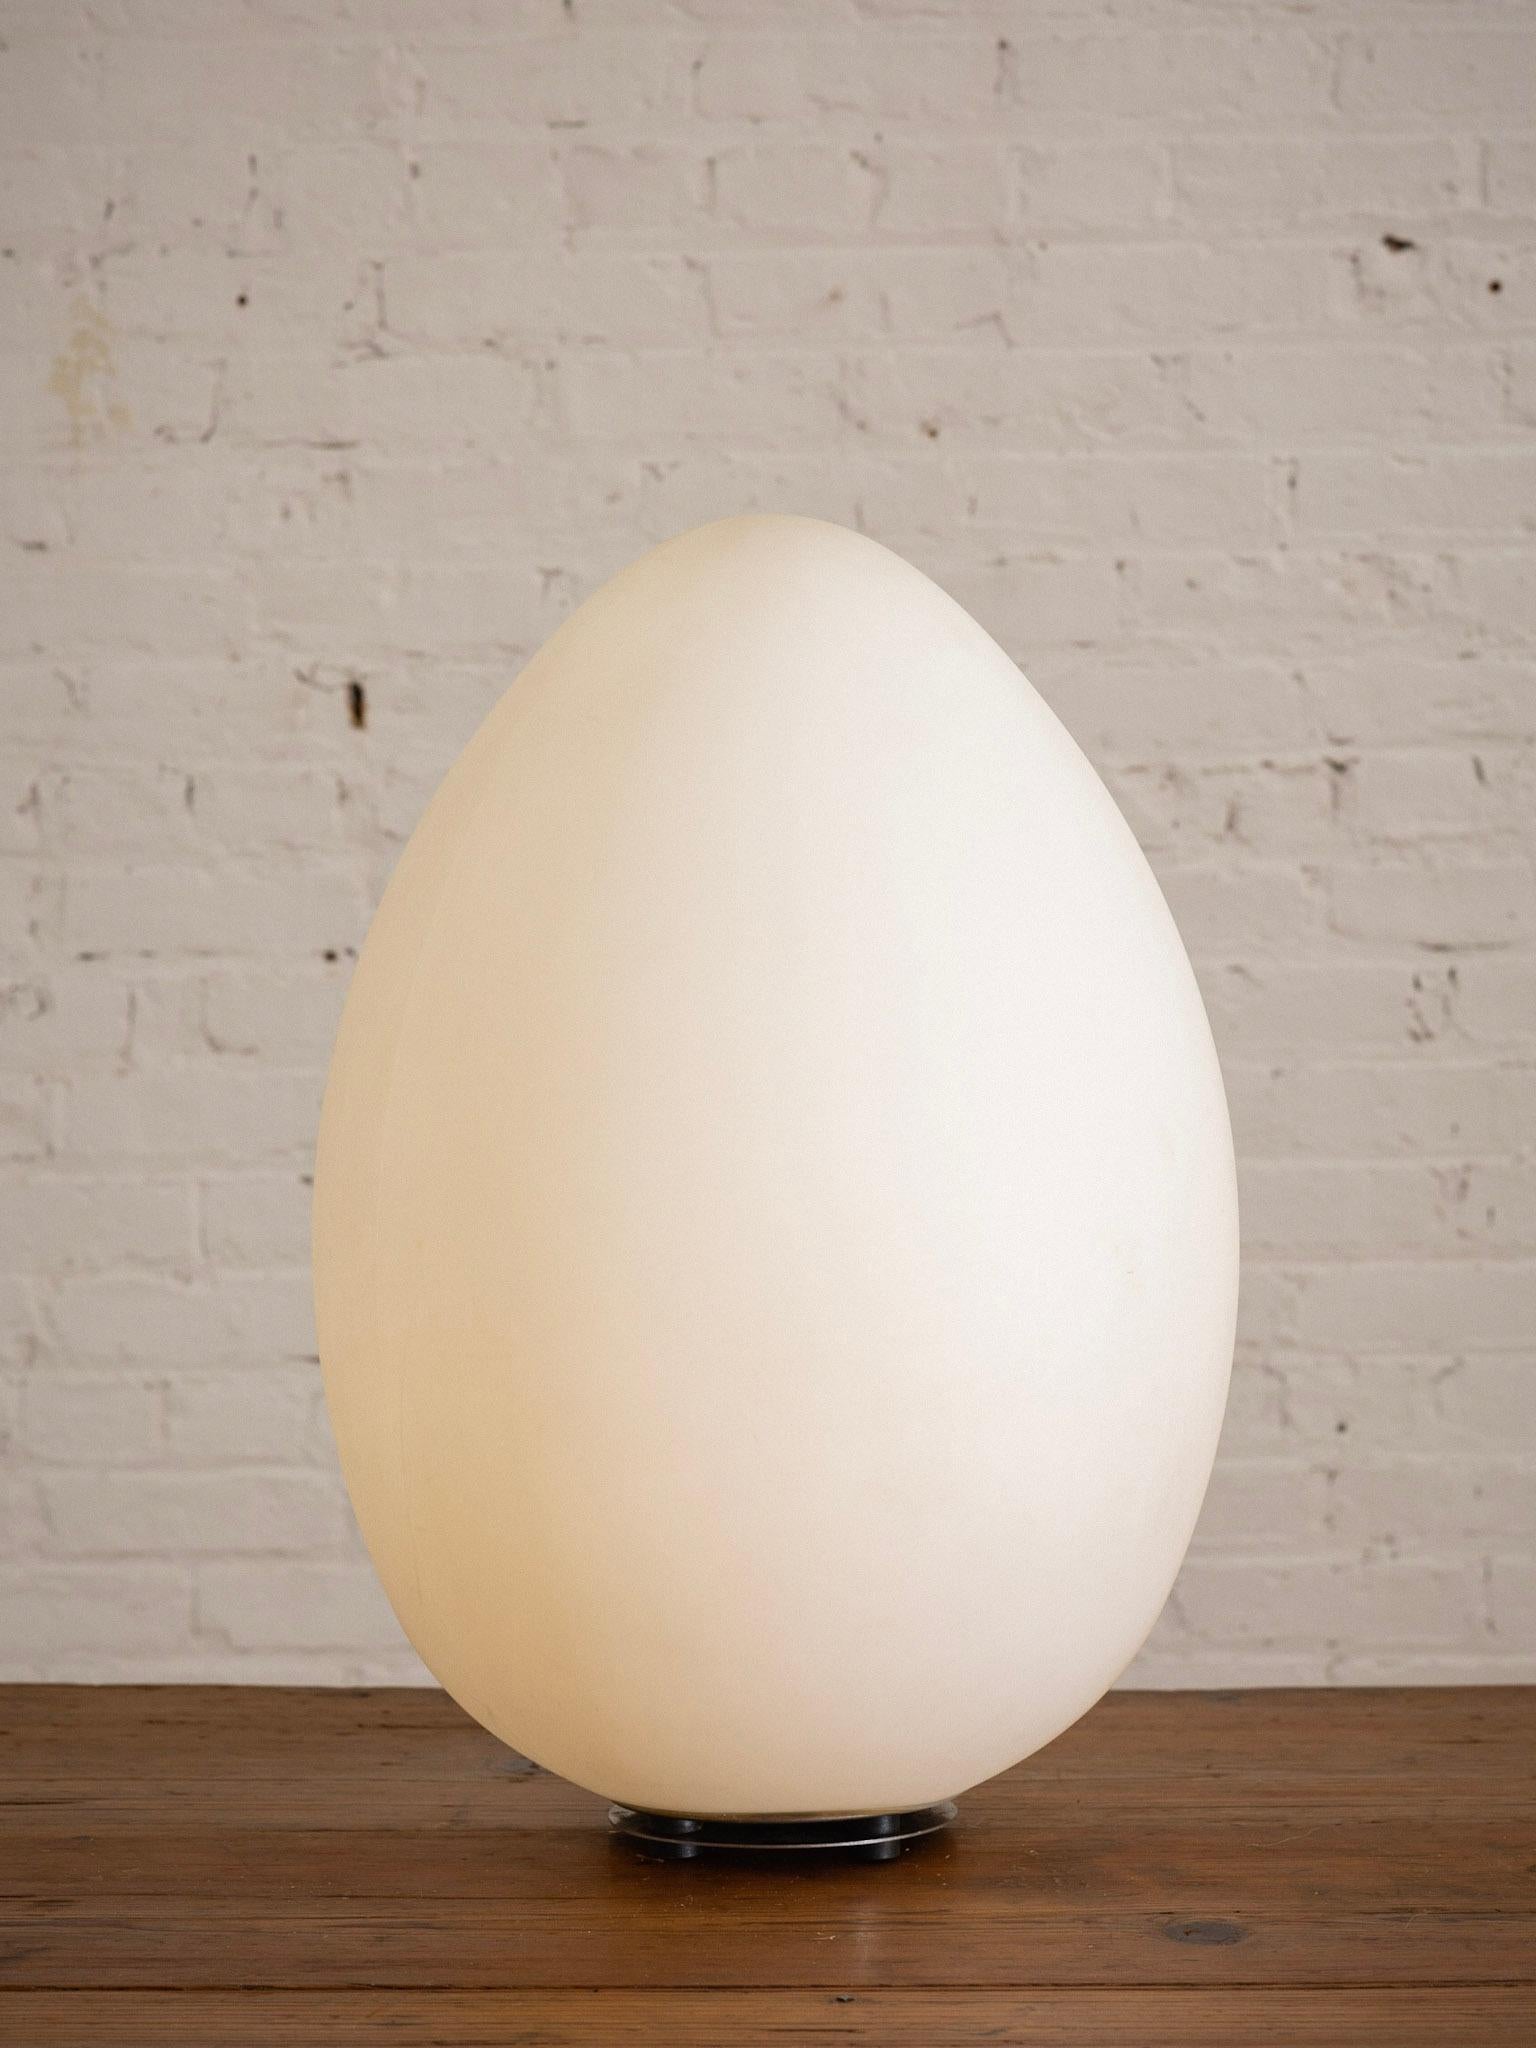 A large molded plastic egg form lamp. Frosty white in color. Emits a warm glow when lit. Chrome disc base. Standard US lightbulb can be replaced by removing the base with and allen wrench. Pair available, sold separately.